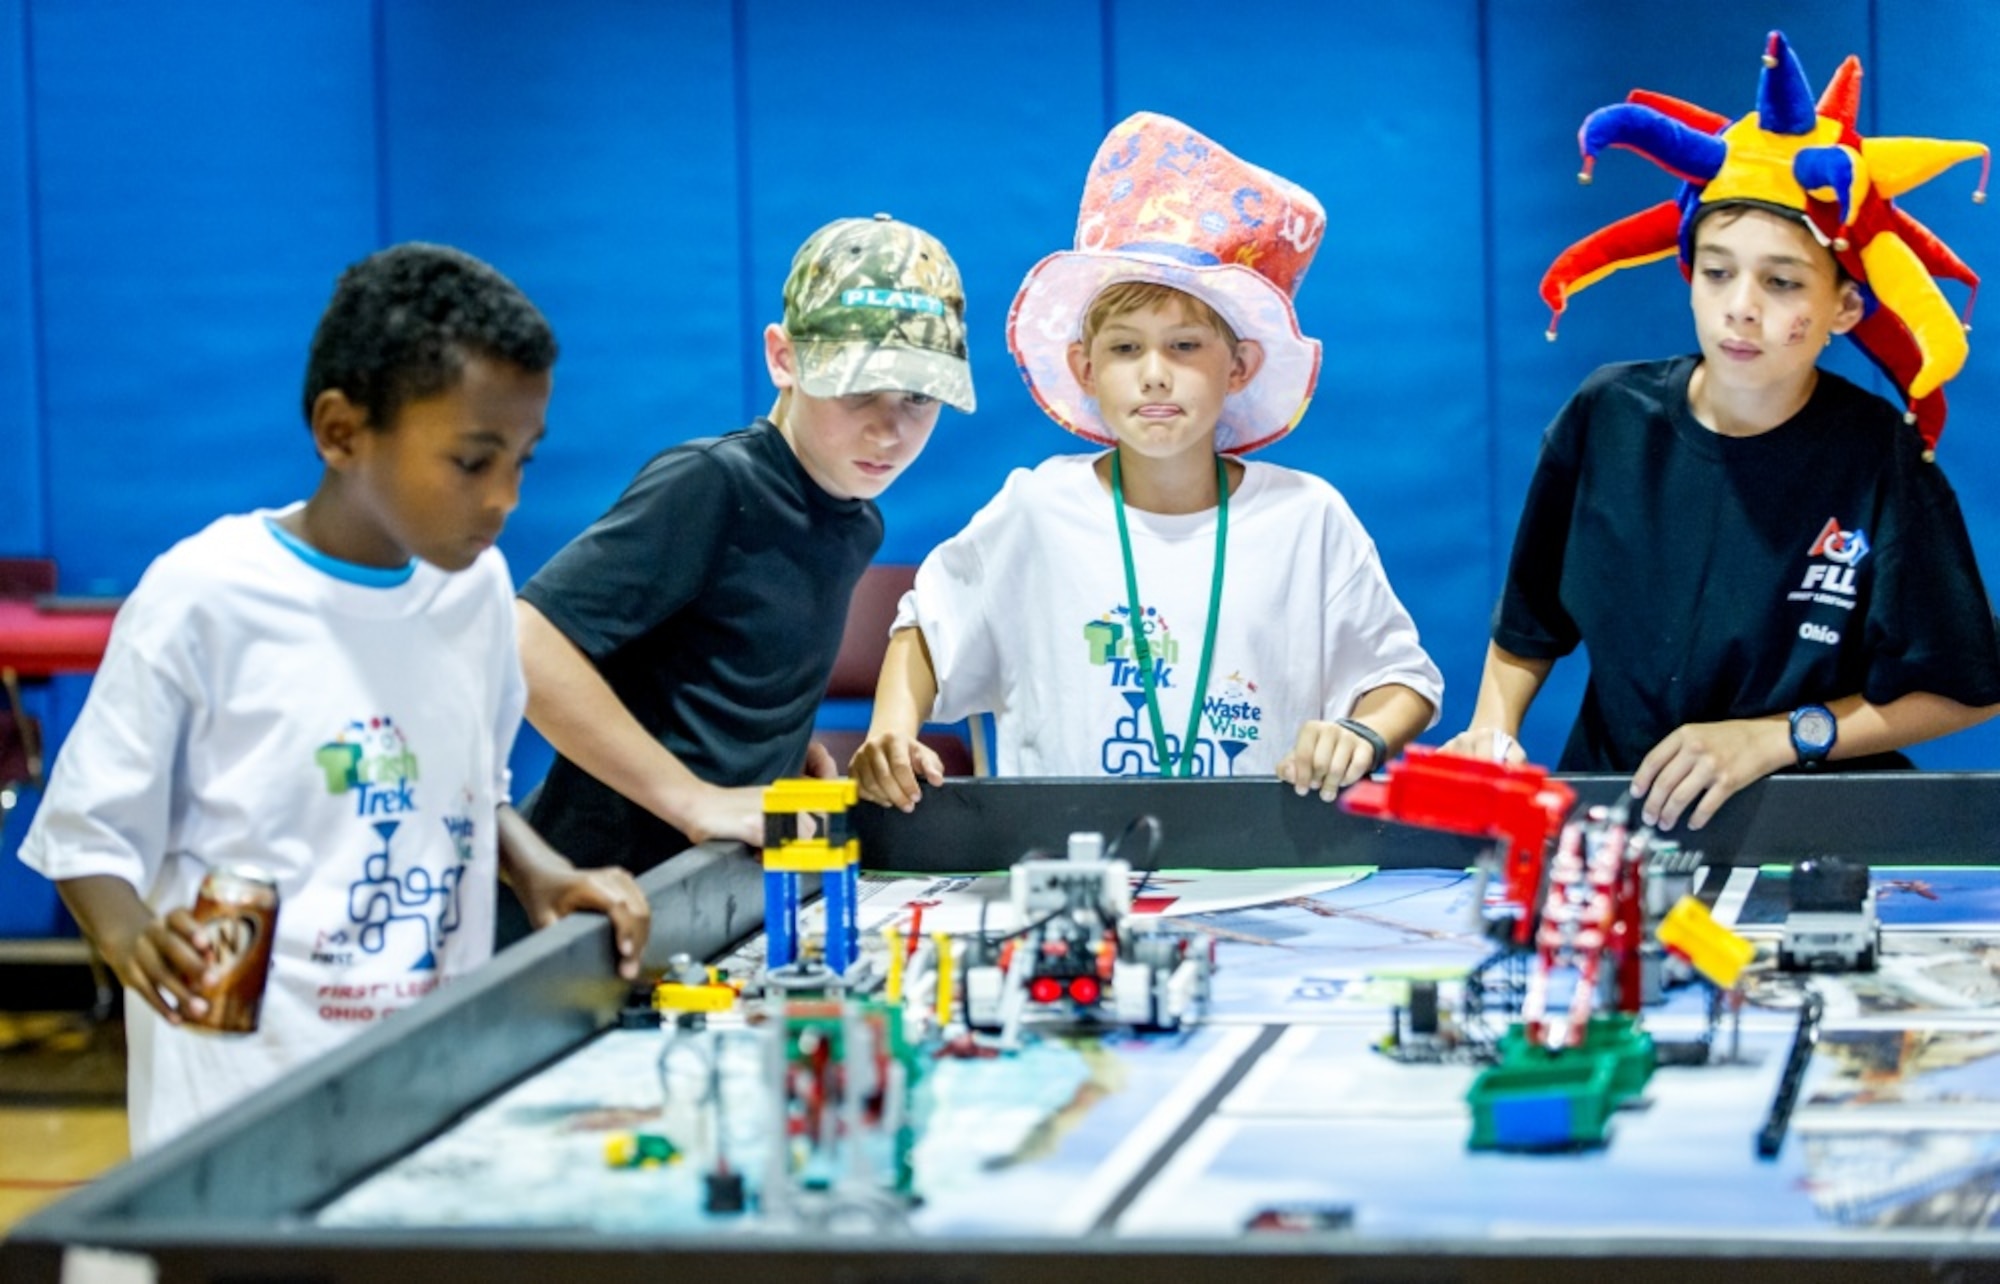 Left to right, Samson Scheie, 12, Brendan Marx, 12 Samuel Snowden, 9, and Joeseph Yoeder, 11, [cq] test out their robot before competing in a First Lego League tournament at DoD's Starbase building near the Air Force Research Laboratory at Wright Patterson Air Force Base in Dayton, Ohio, Jul 22, 2016. The Air Force STEM outreach offices work with the First Lego League, which teaches young students how to build and program robots made of Legos, to not only support STEM education, but also to make young technical minds aware of opportunities to pursue science in the U.S. Air Force.